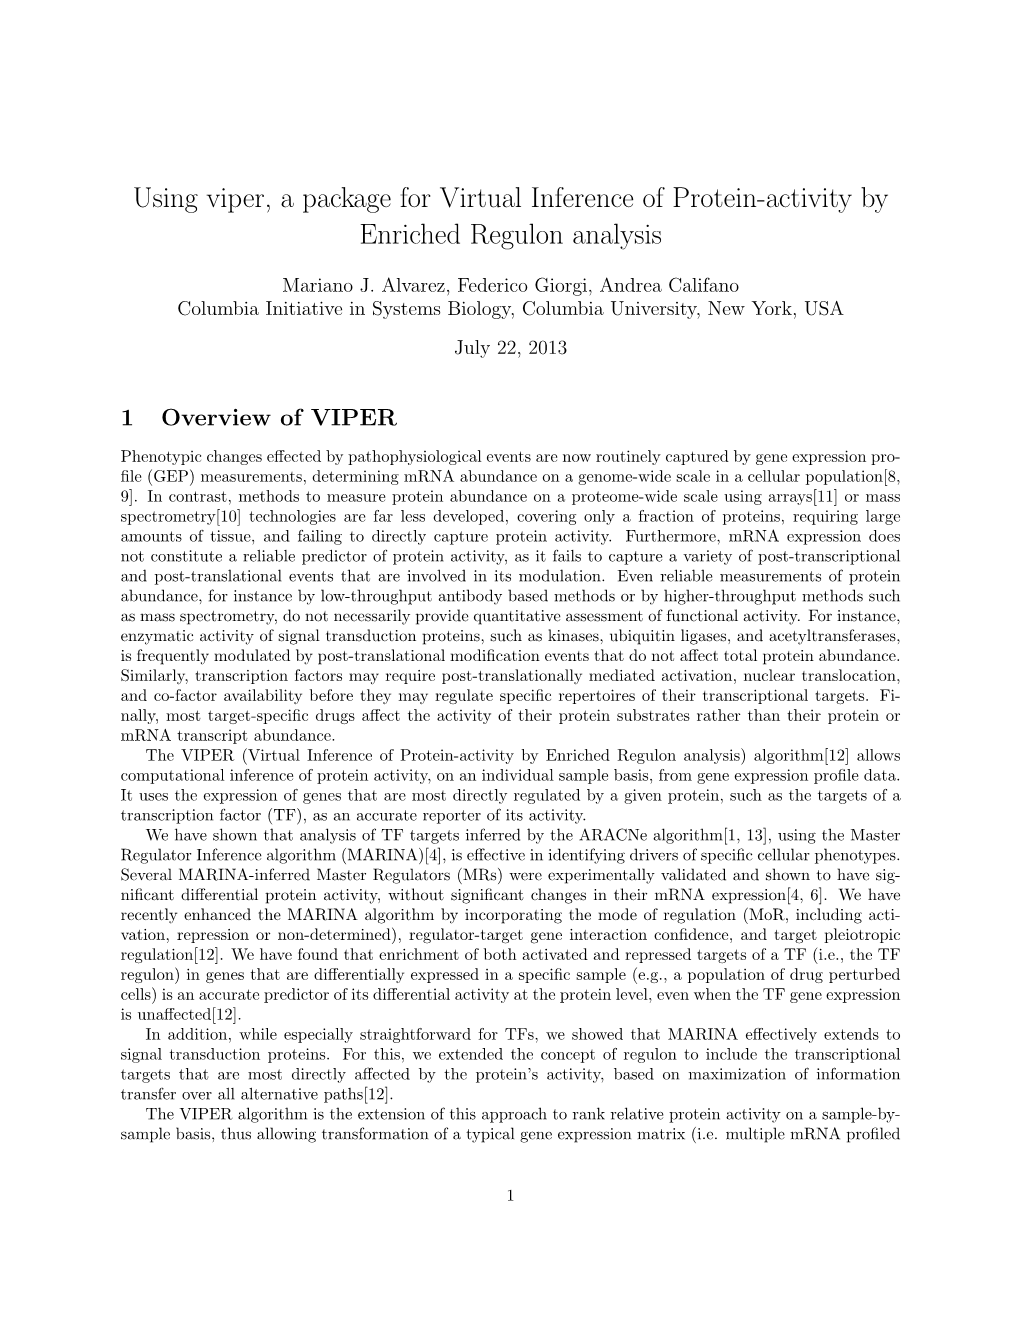 Using Viper, a Package for Virtual Inference of Protein-Activity by Enriched Regulon Analysis